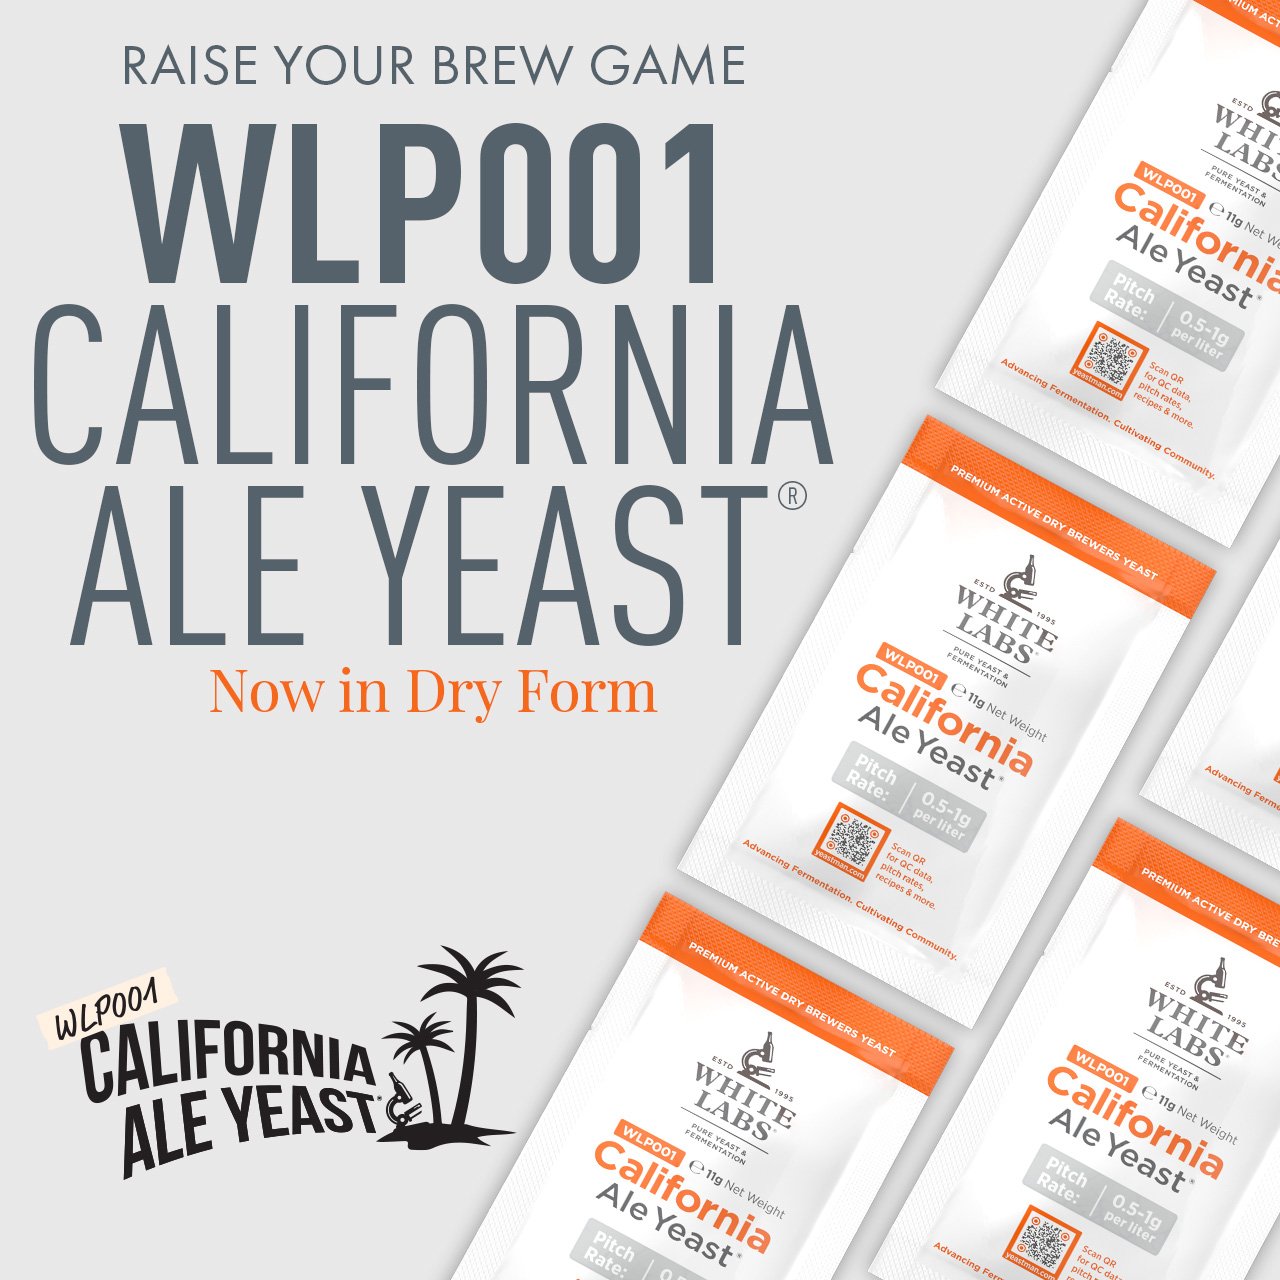 Raise Your Brew Game WLP001 California Ale Yeast ®️ Now in Dry Form